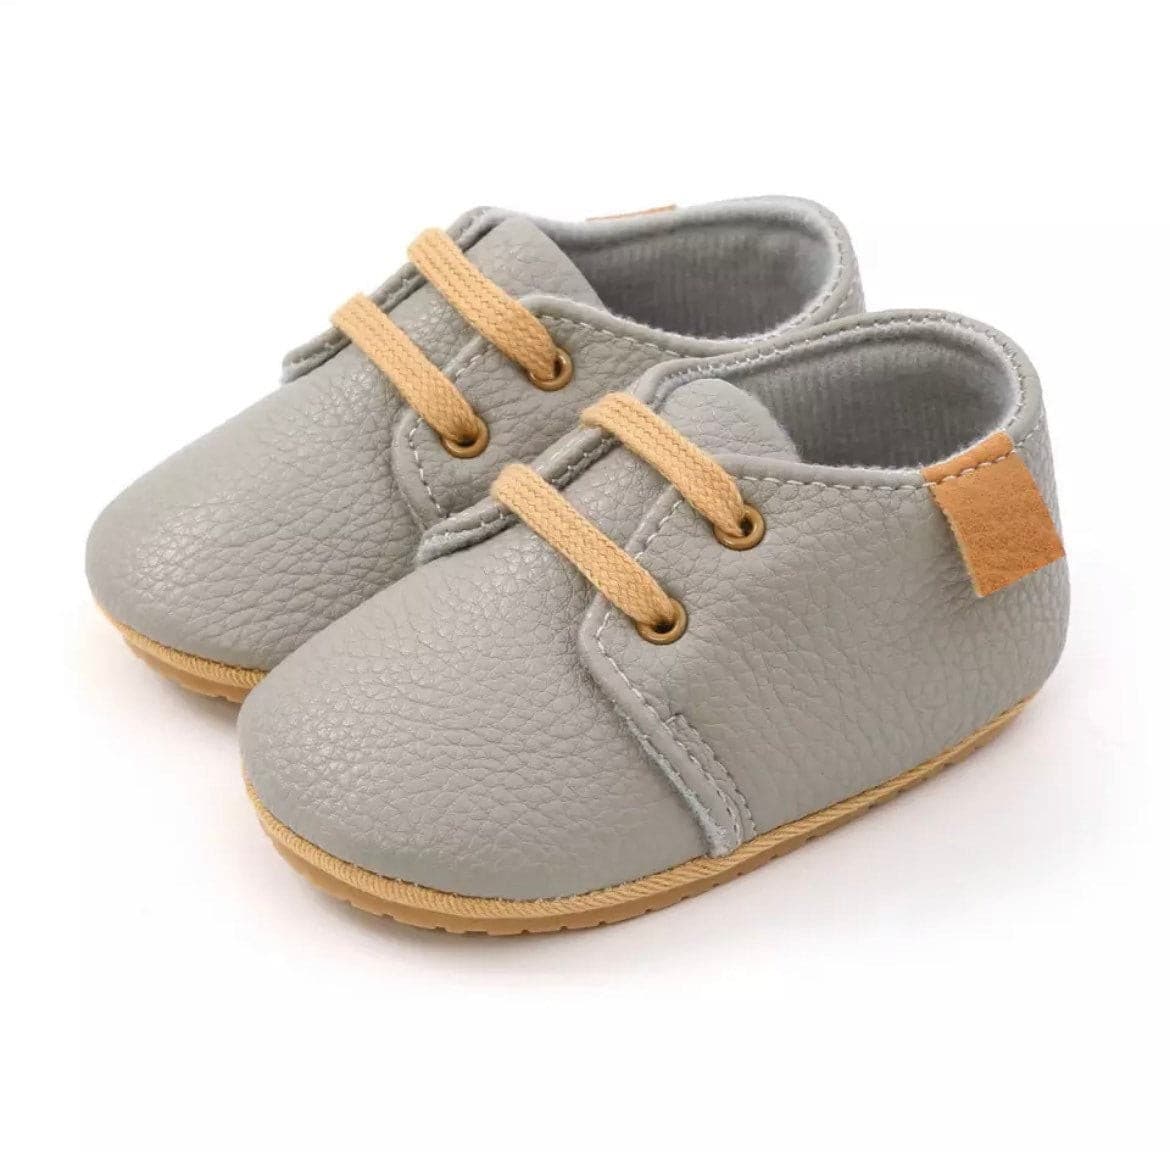 Quality Leather Baby Shoes, Breathable Upper, First Walker Baby Shoes -
 Welcome! Thanks for looking in our shop and viewing these beautifully made baby shoes.Our high quality first walker shoes are durable, breathable &amp; super cute -Bijou Bubs